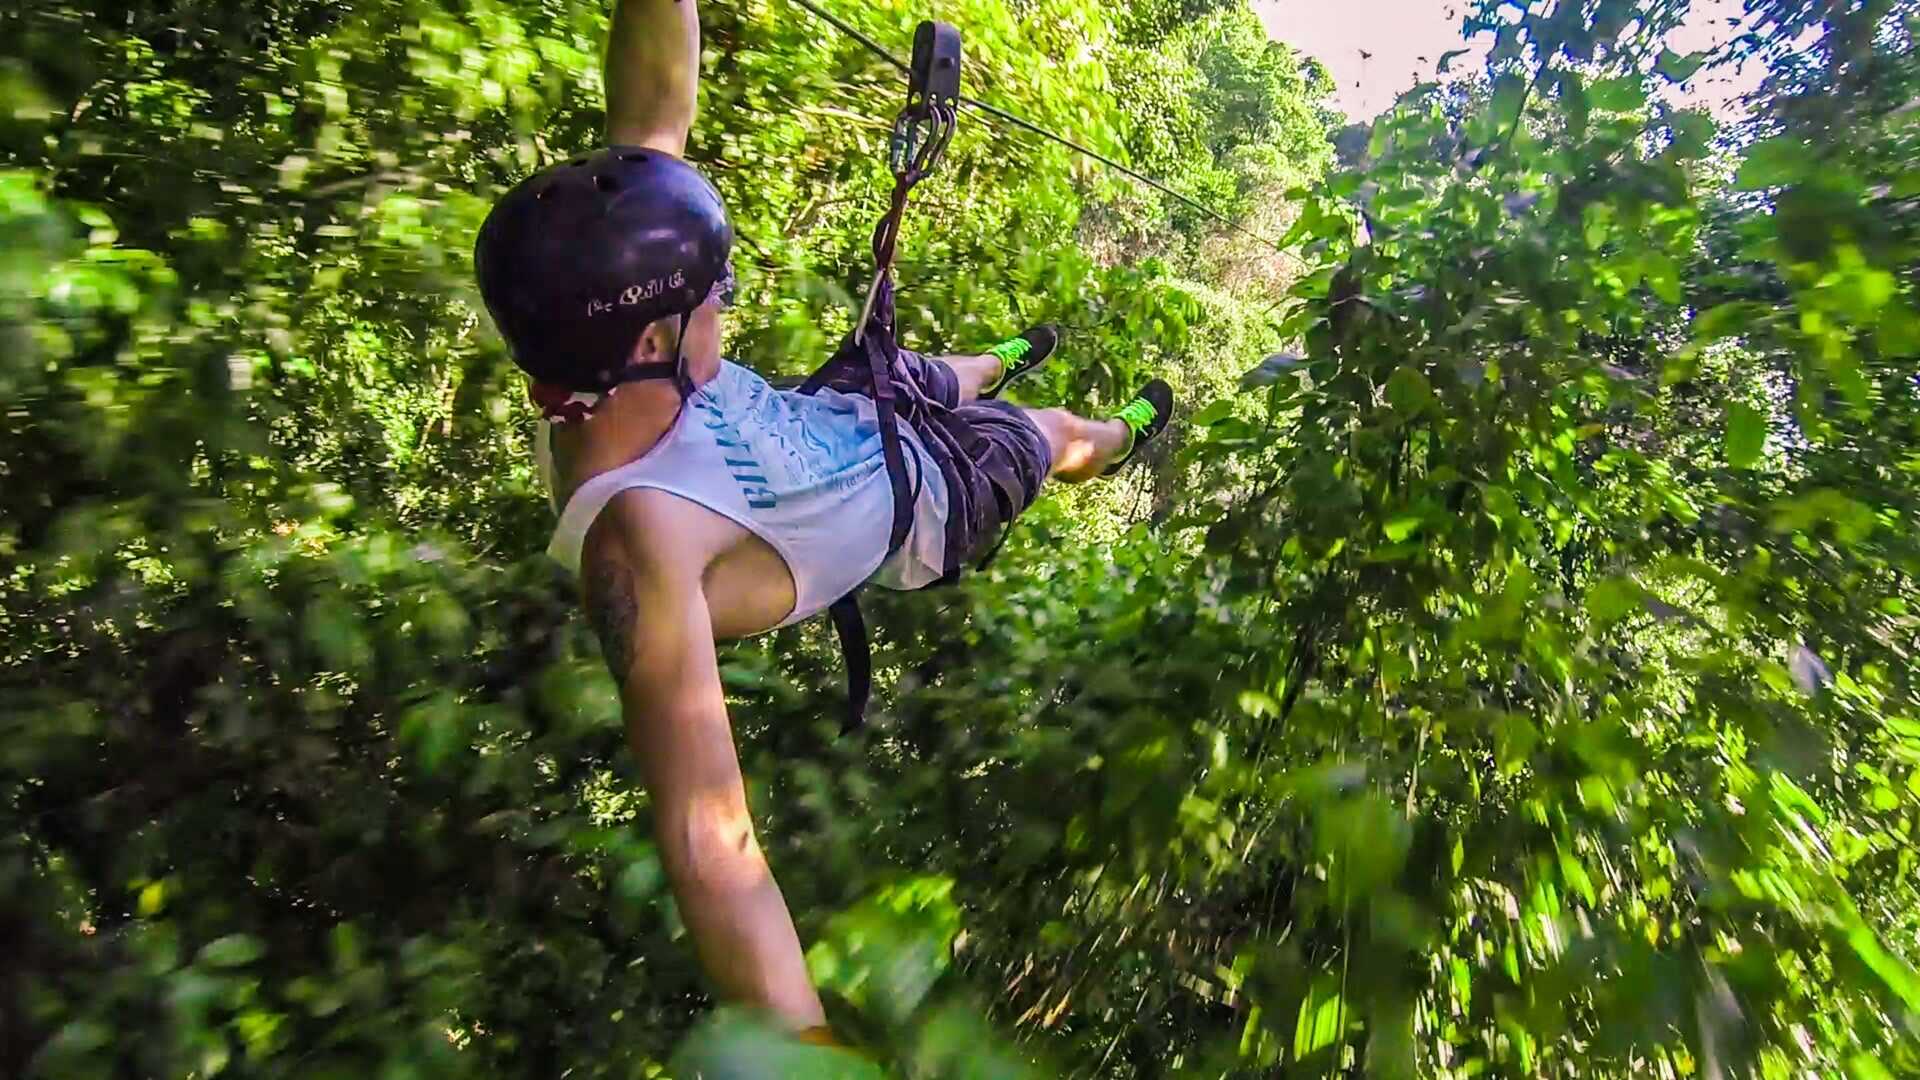 ZIPLINE - WHEN YOUR BODY AND MIND ARE FREE